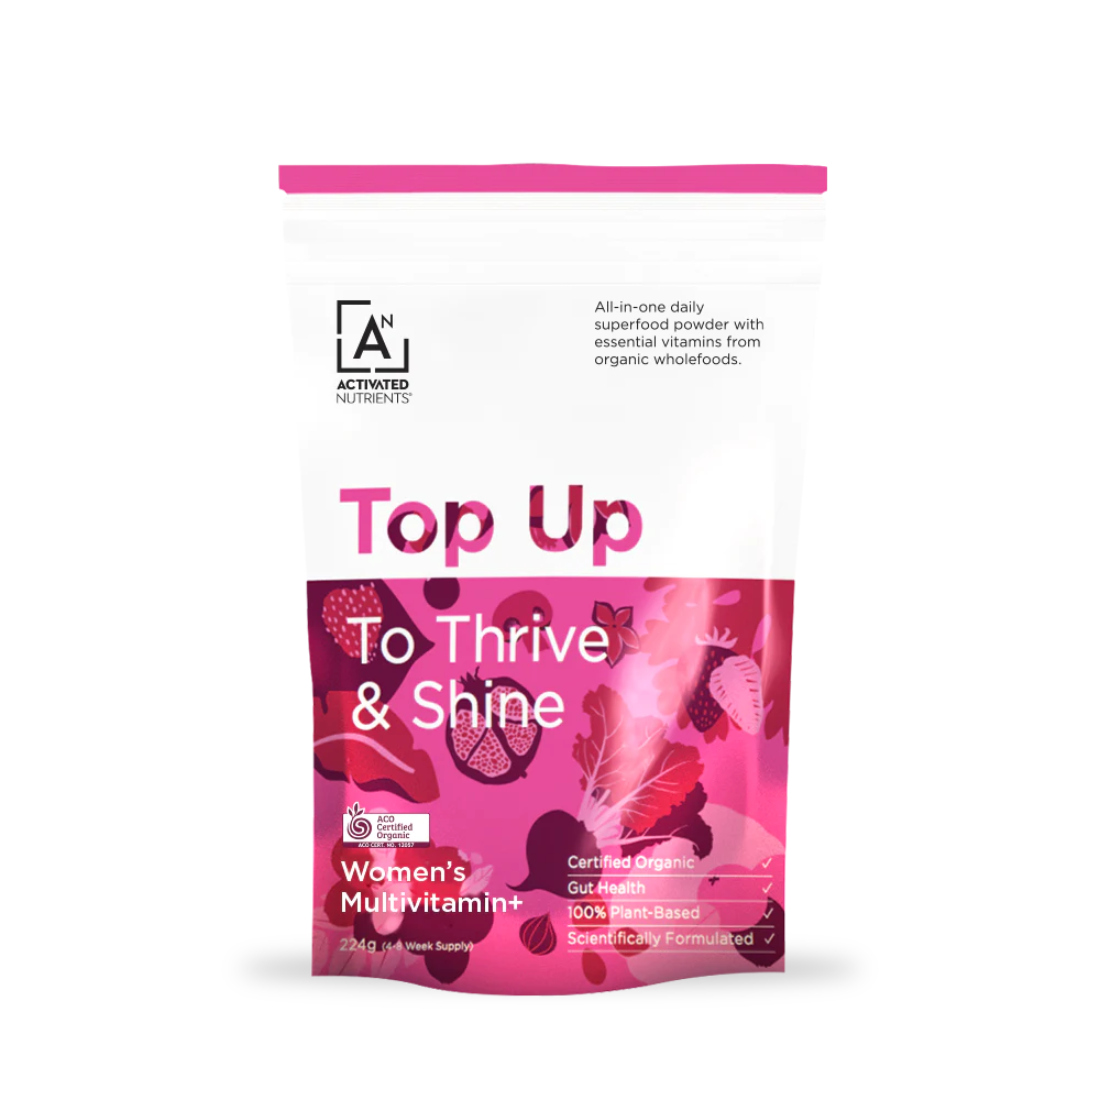 Activated Nutrients Top Up Organic Women's Superfood Powder 224g